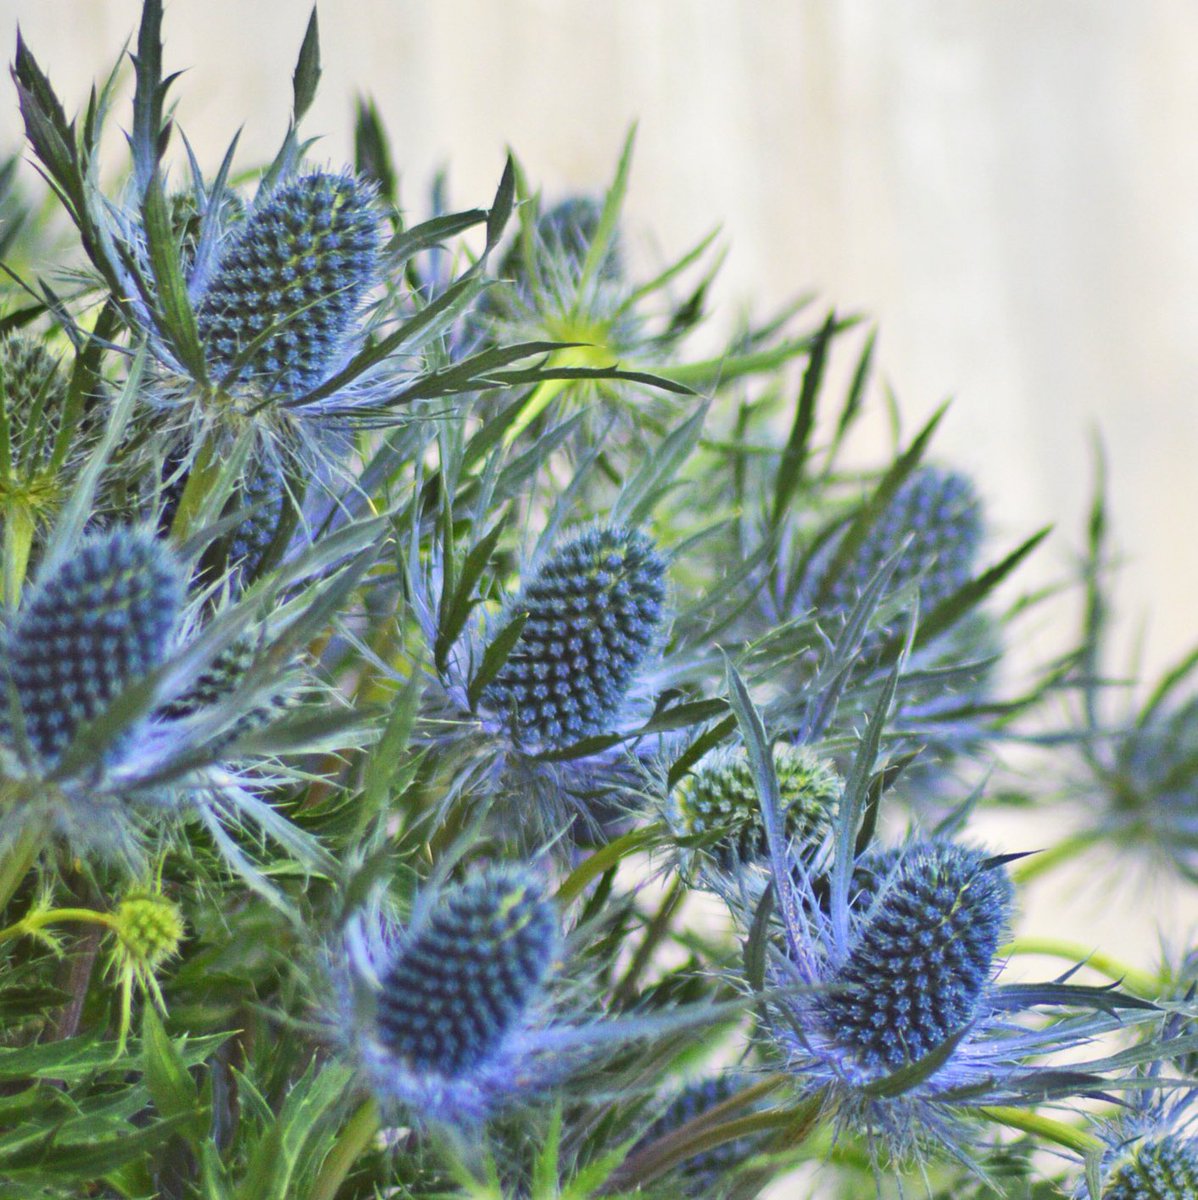 Eryngium, what an amazing product! We are the one stop flower shop, everything you need, we have it. #eryngium #delicate #pastelcolors #blue #cute #vintage #farminecuador #summerflowers #directshipping #lhf #lahaciendaflowers